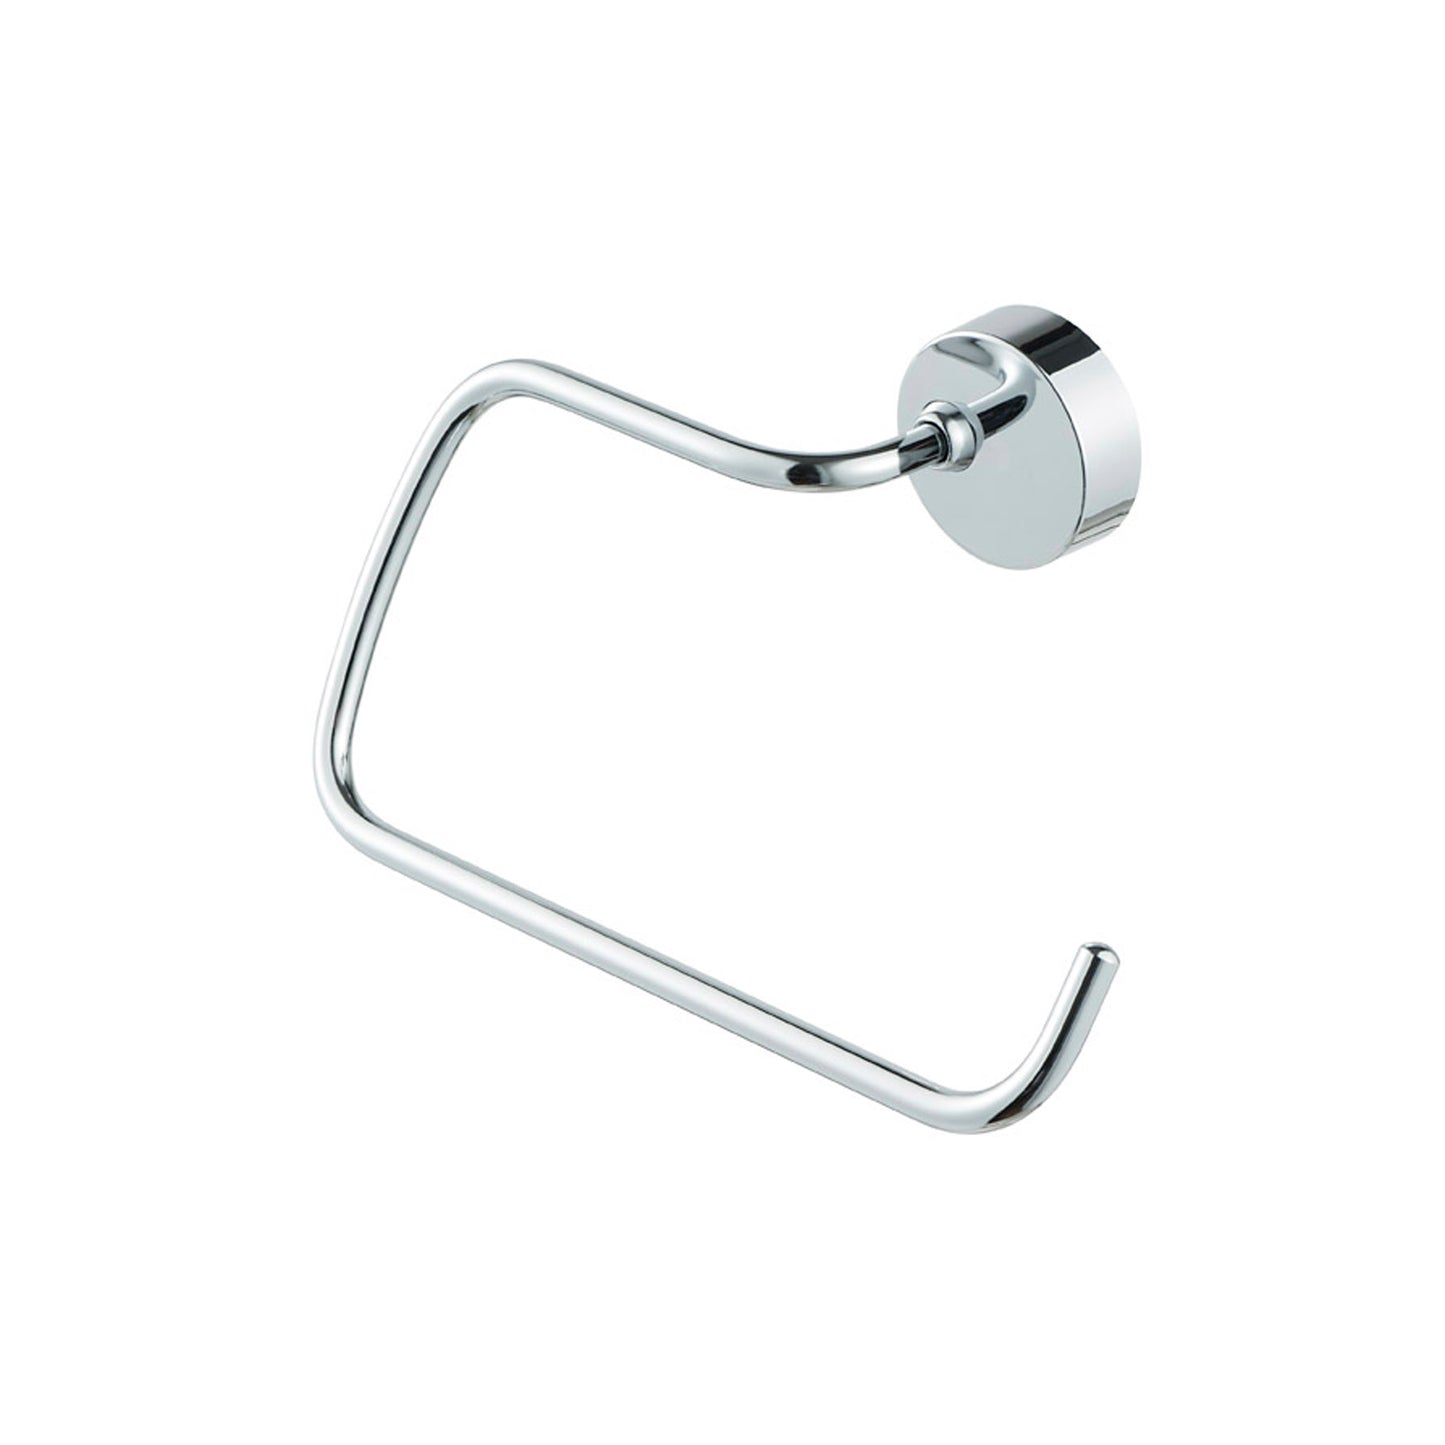 Geesa 27 Collection Towel Ring 2704-02